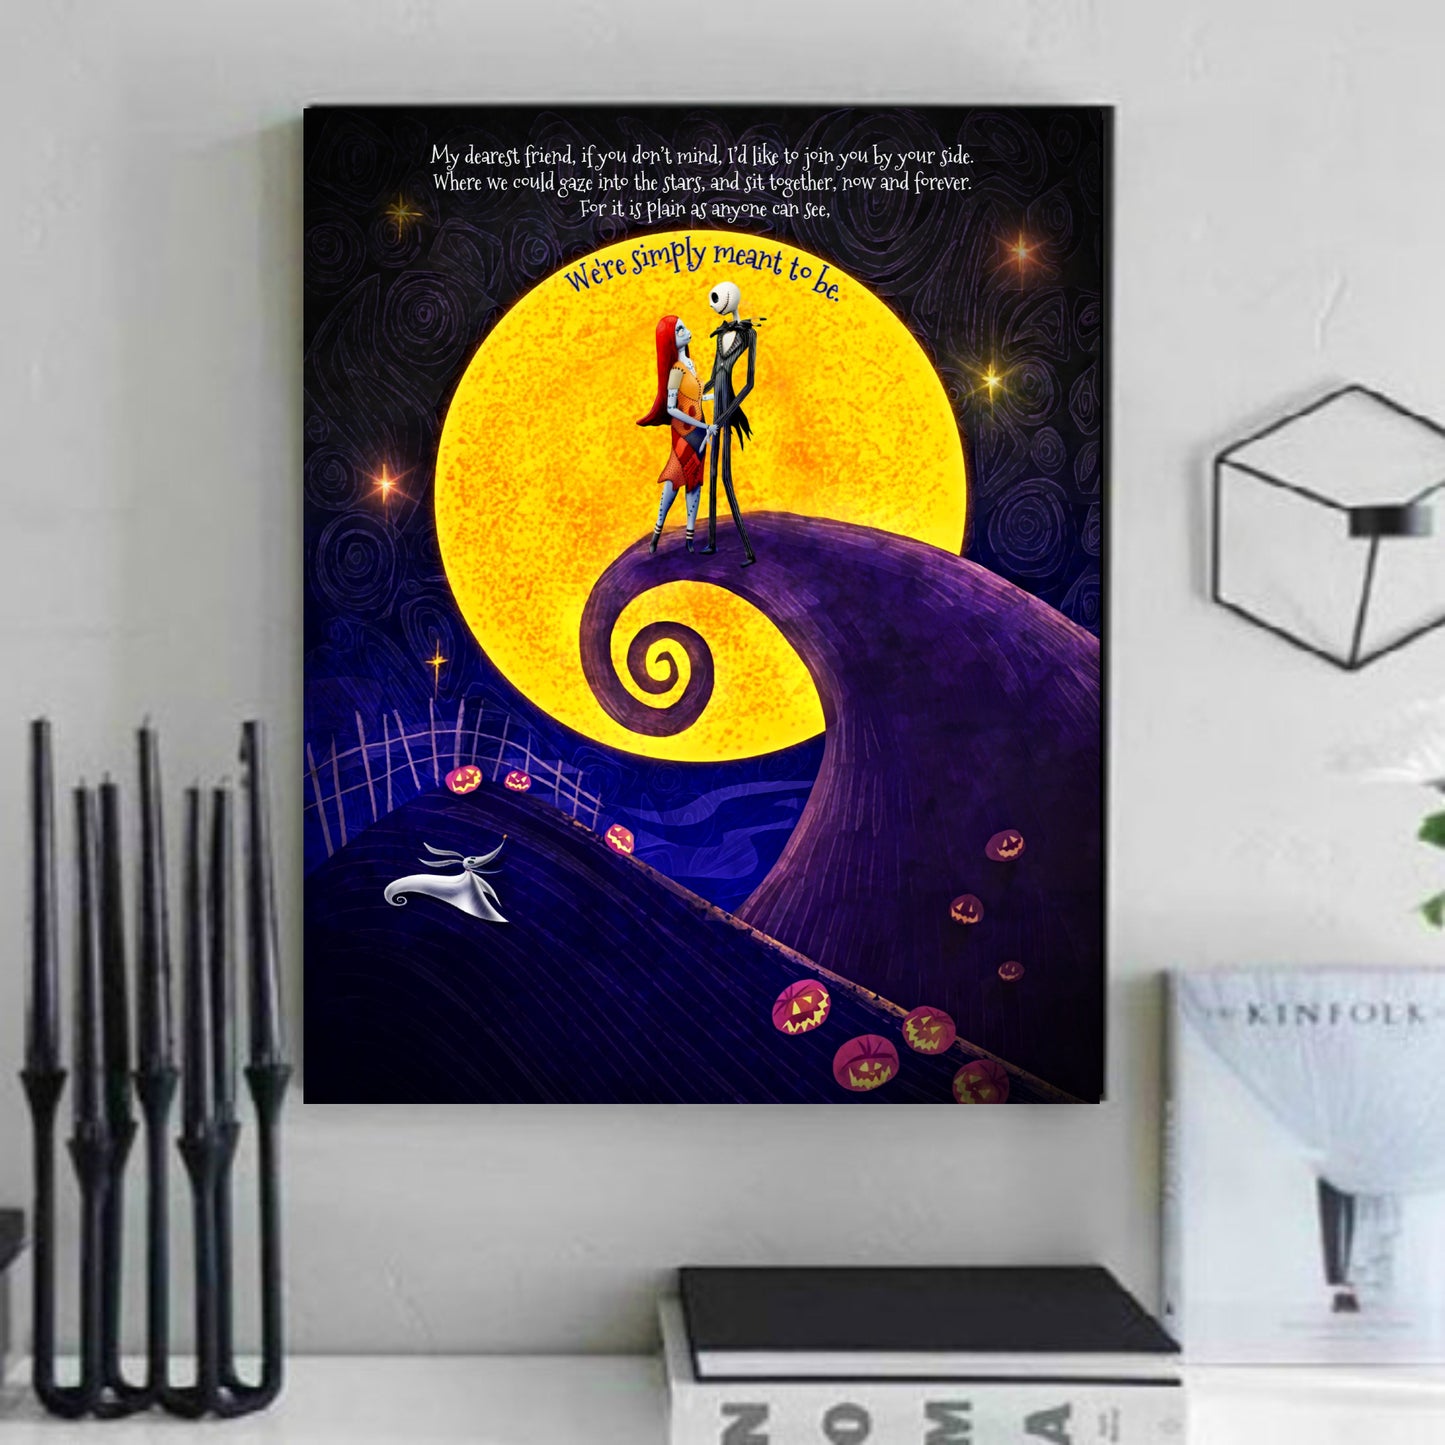 Nightmare Before Christmas Simply meant to be wedding gift